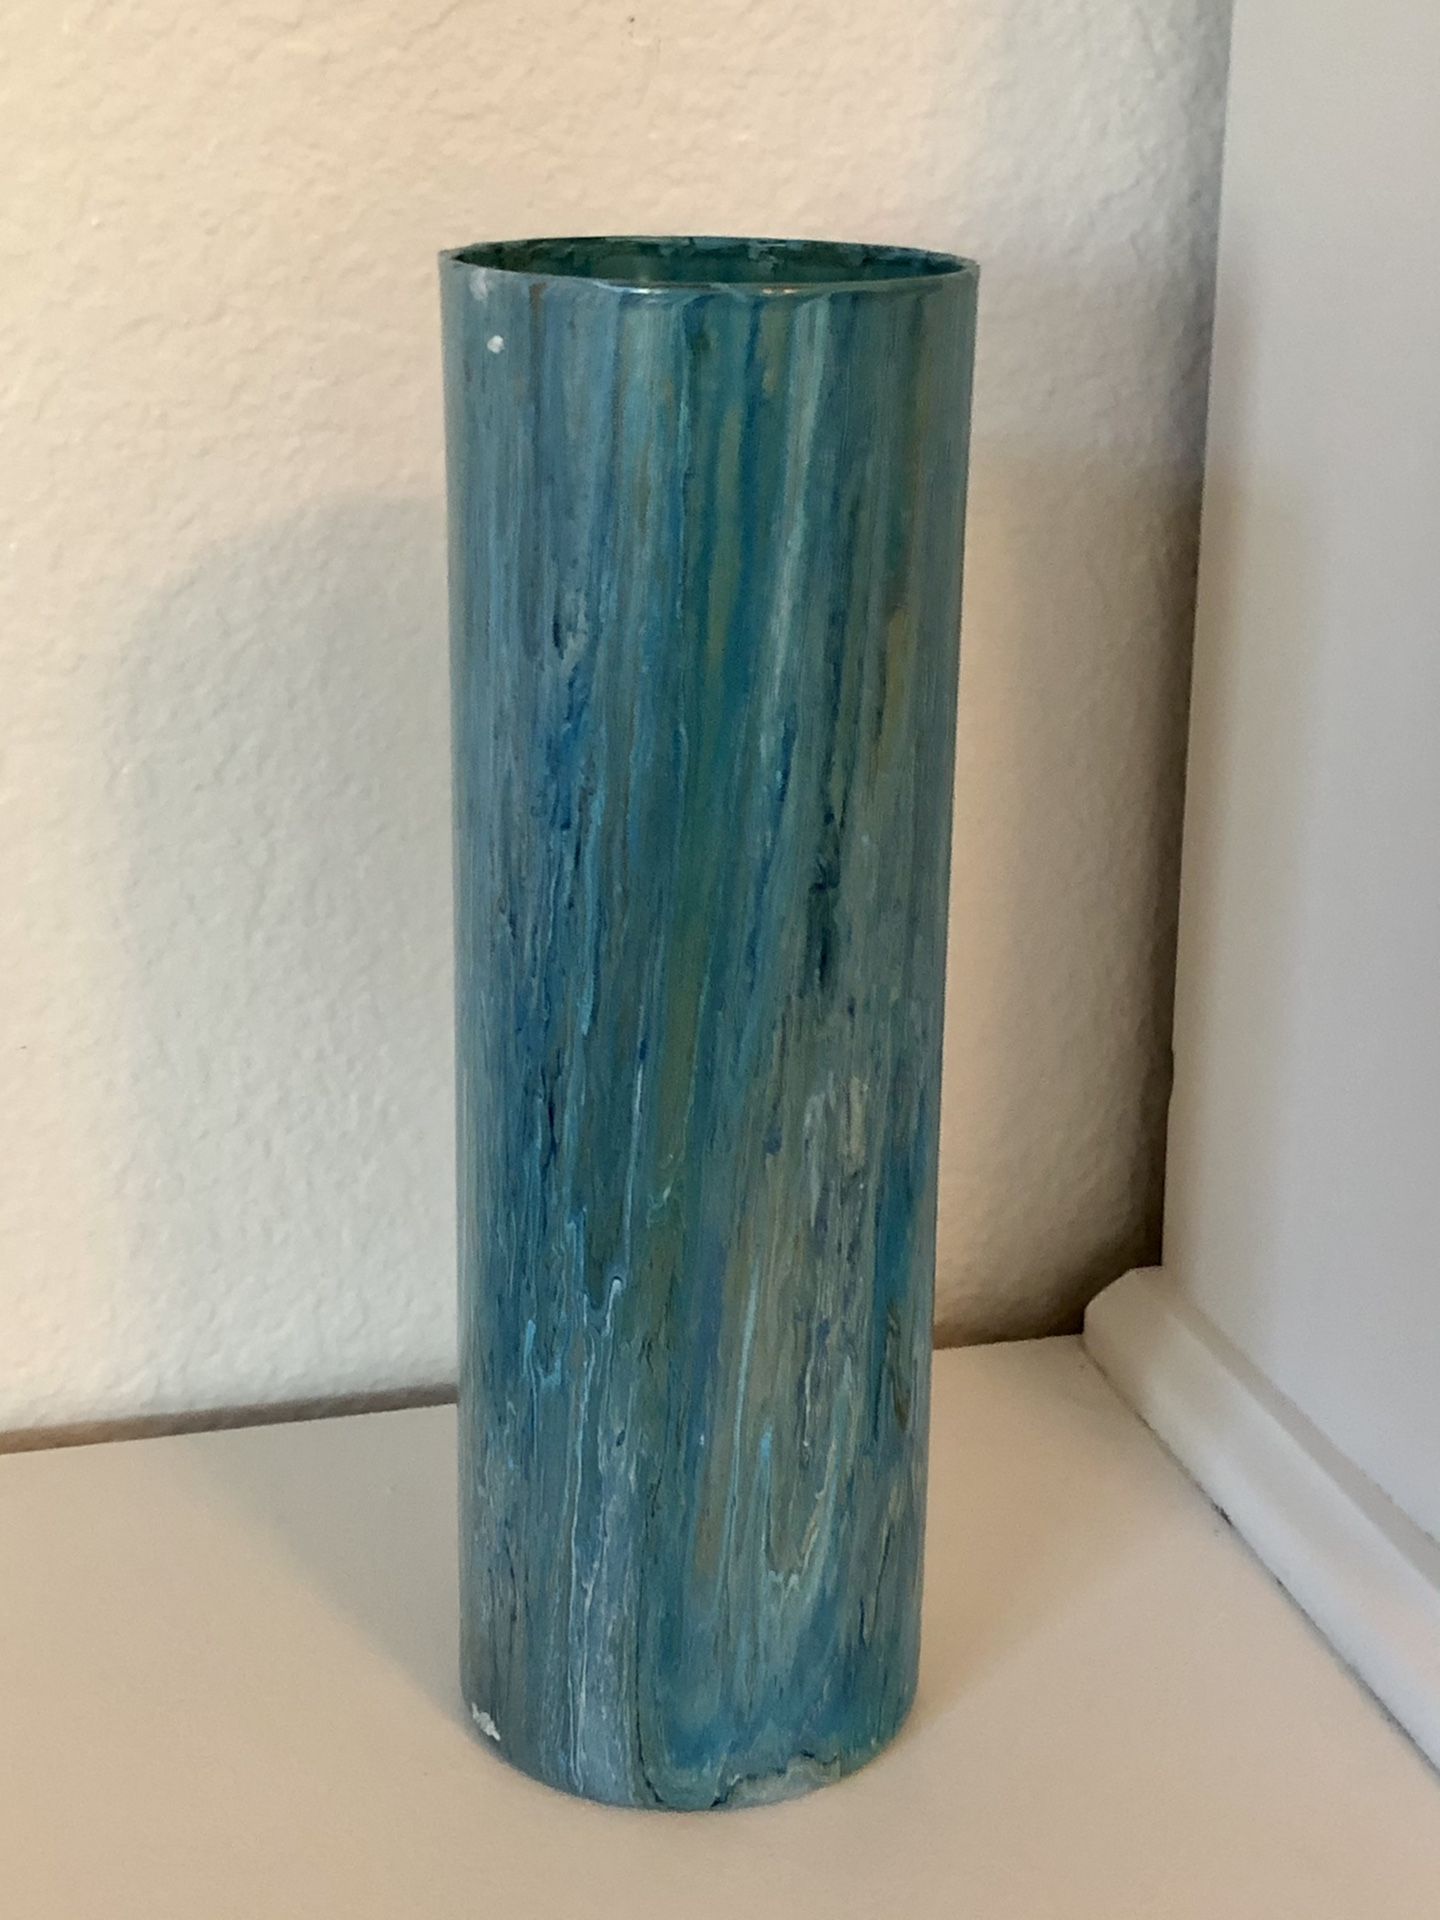 Tall Glass Painted Vase: 10.5” x 3.5”